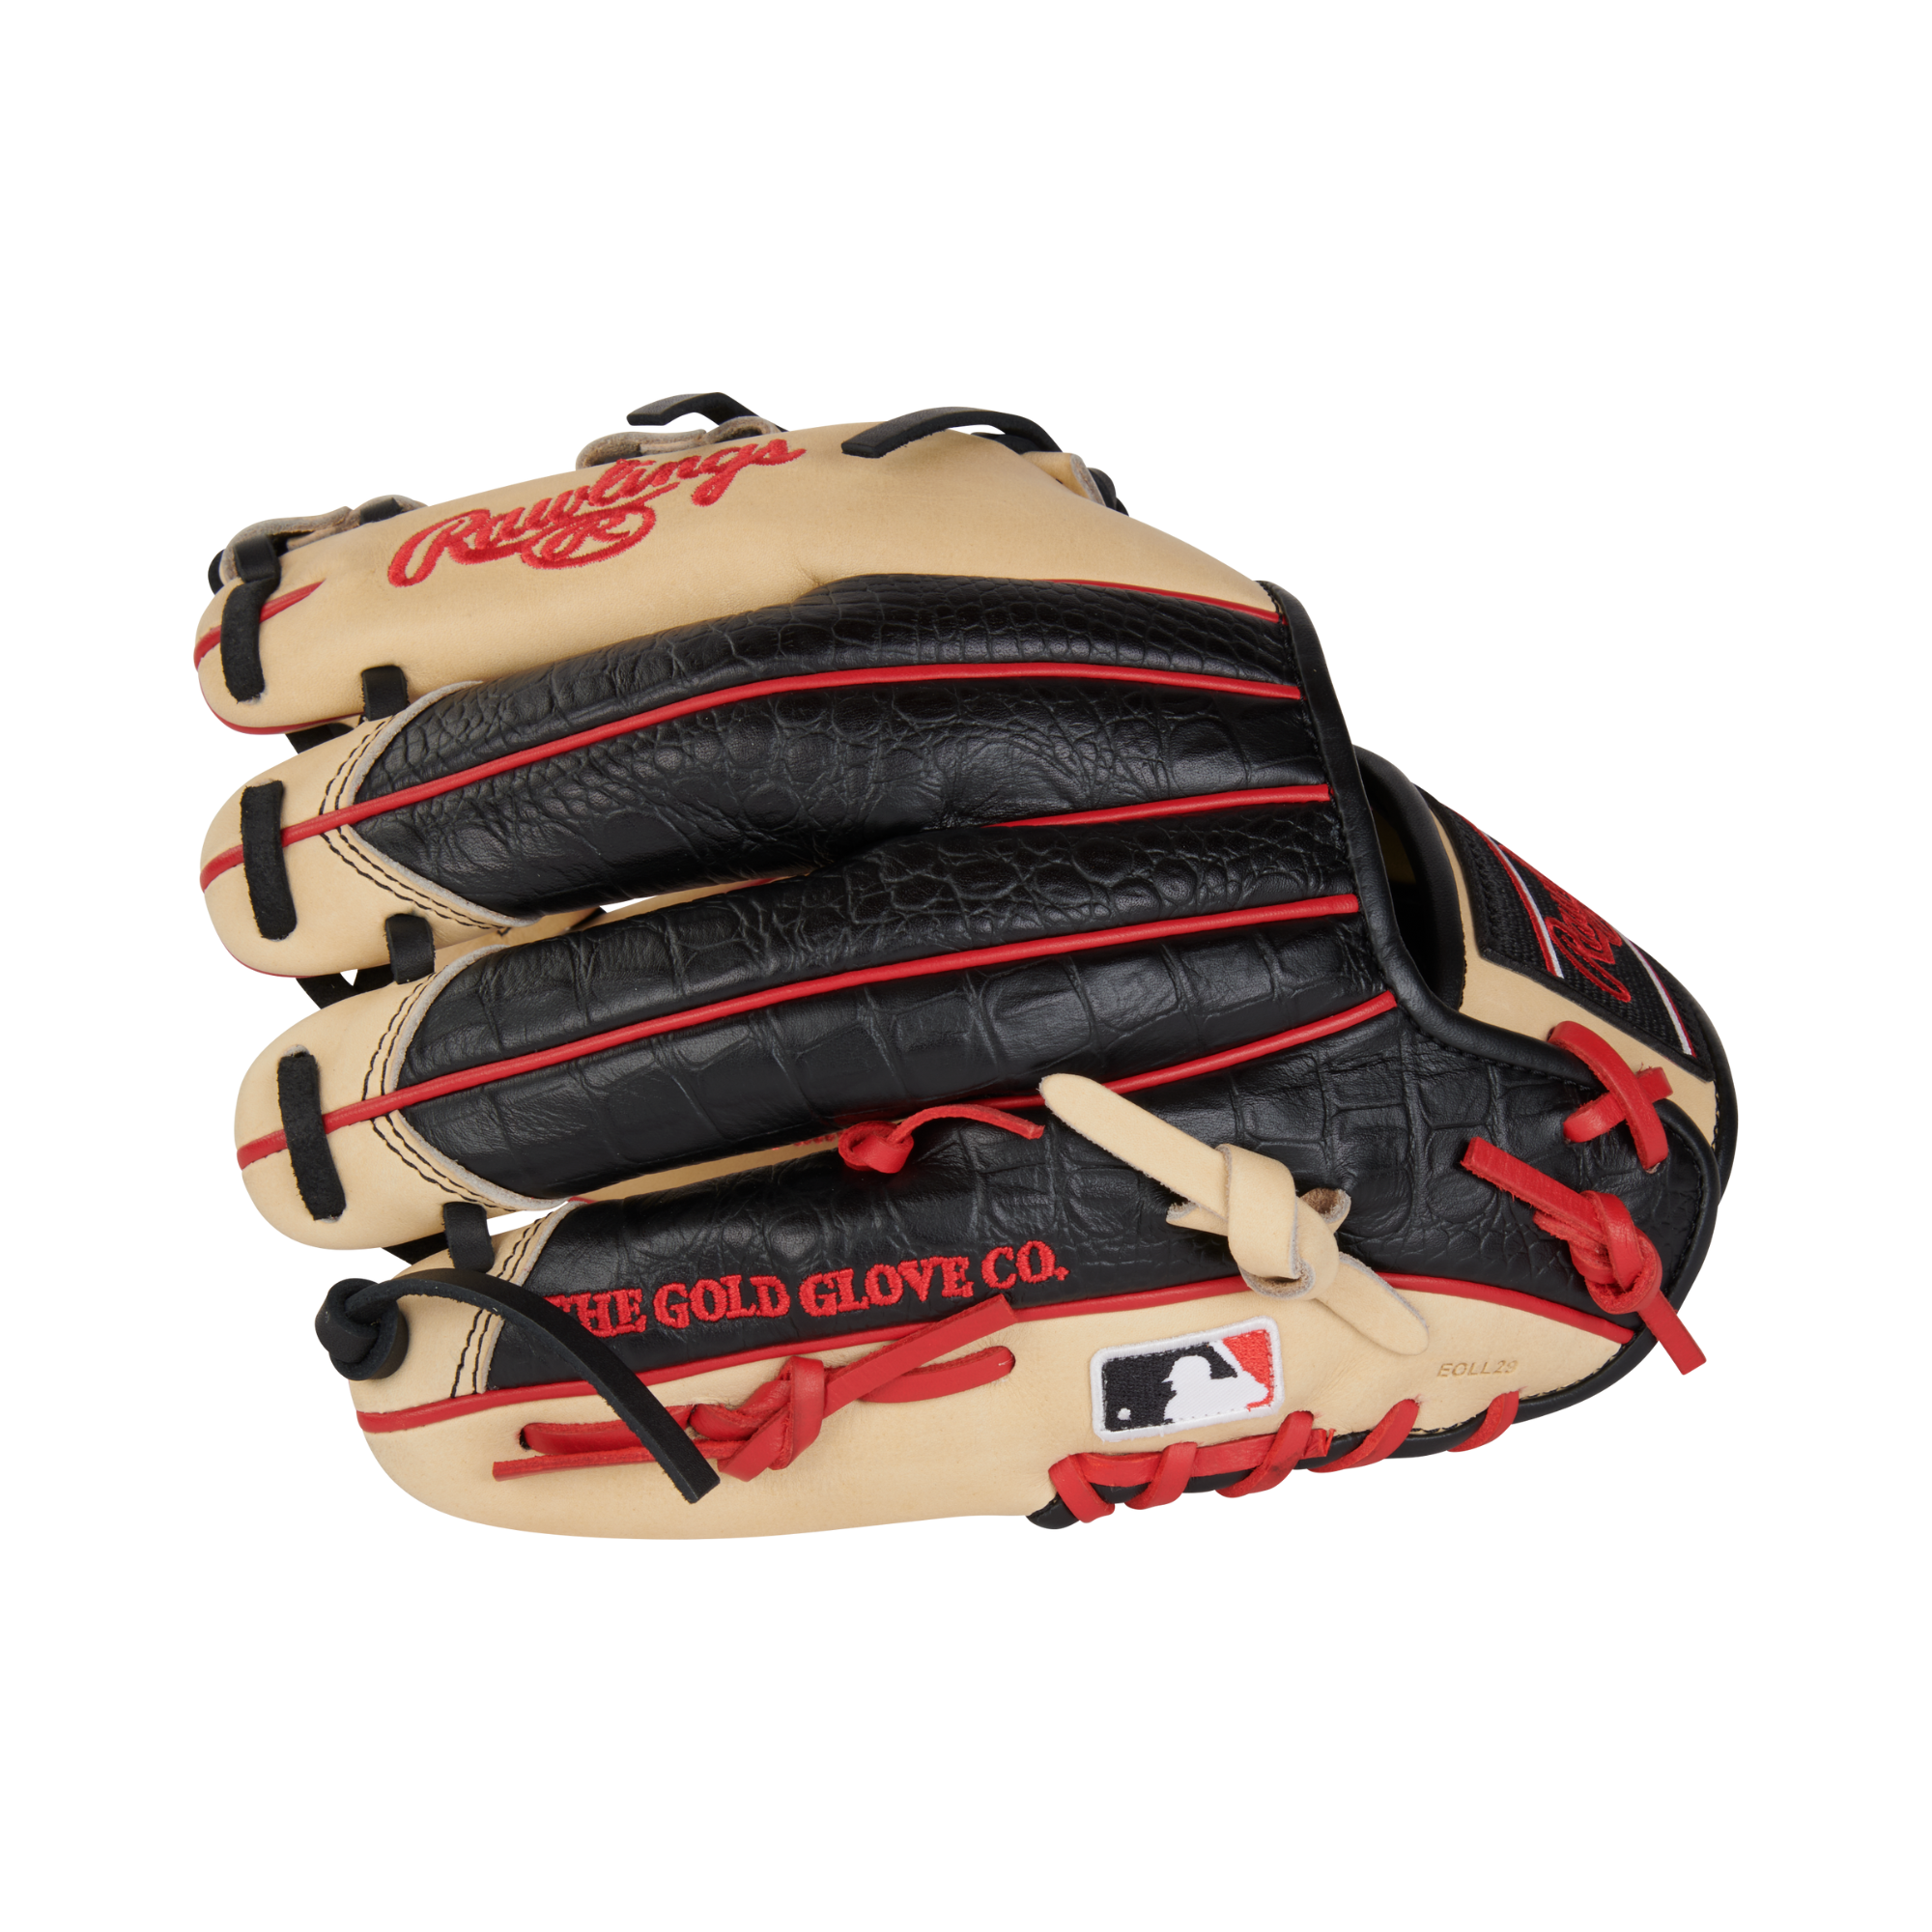 Rawlings Heart Of The Hide With R2G Technology Series Baseball Glove 11.5" RHT